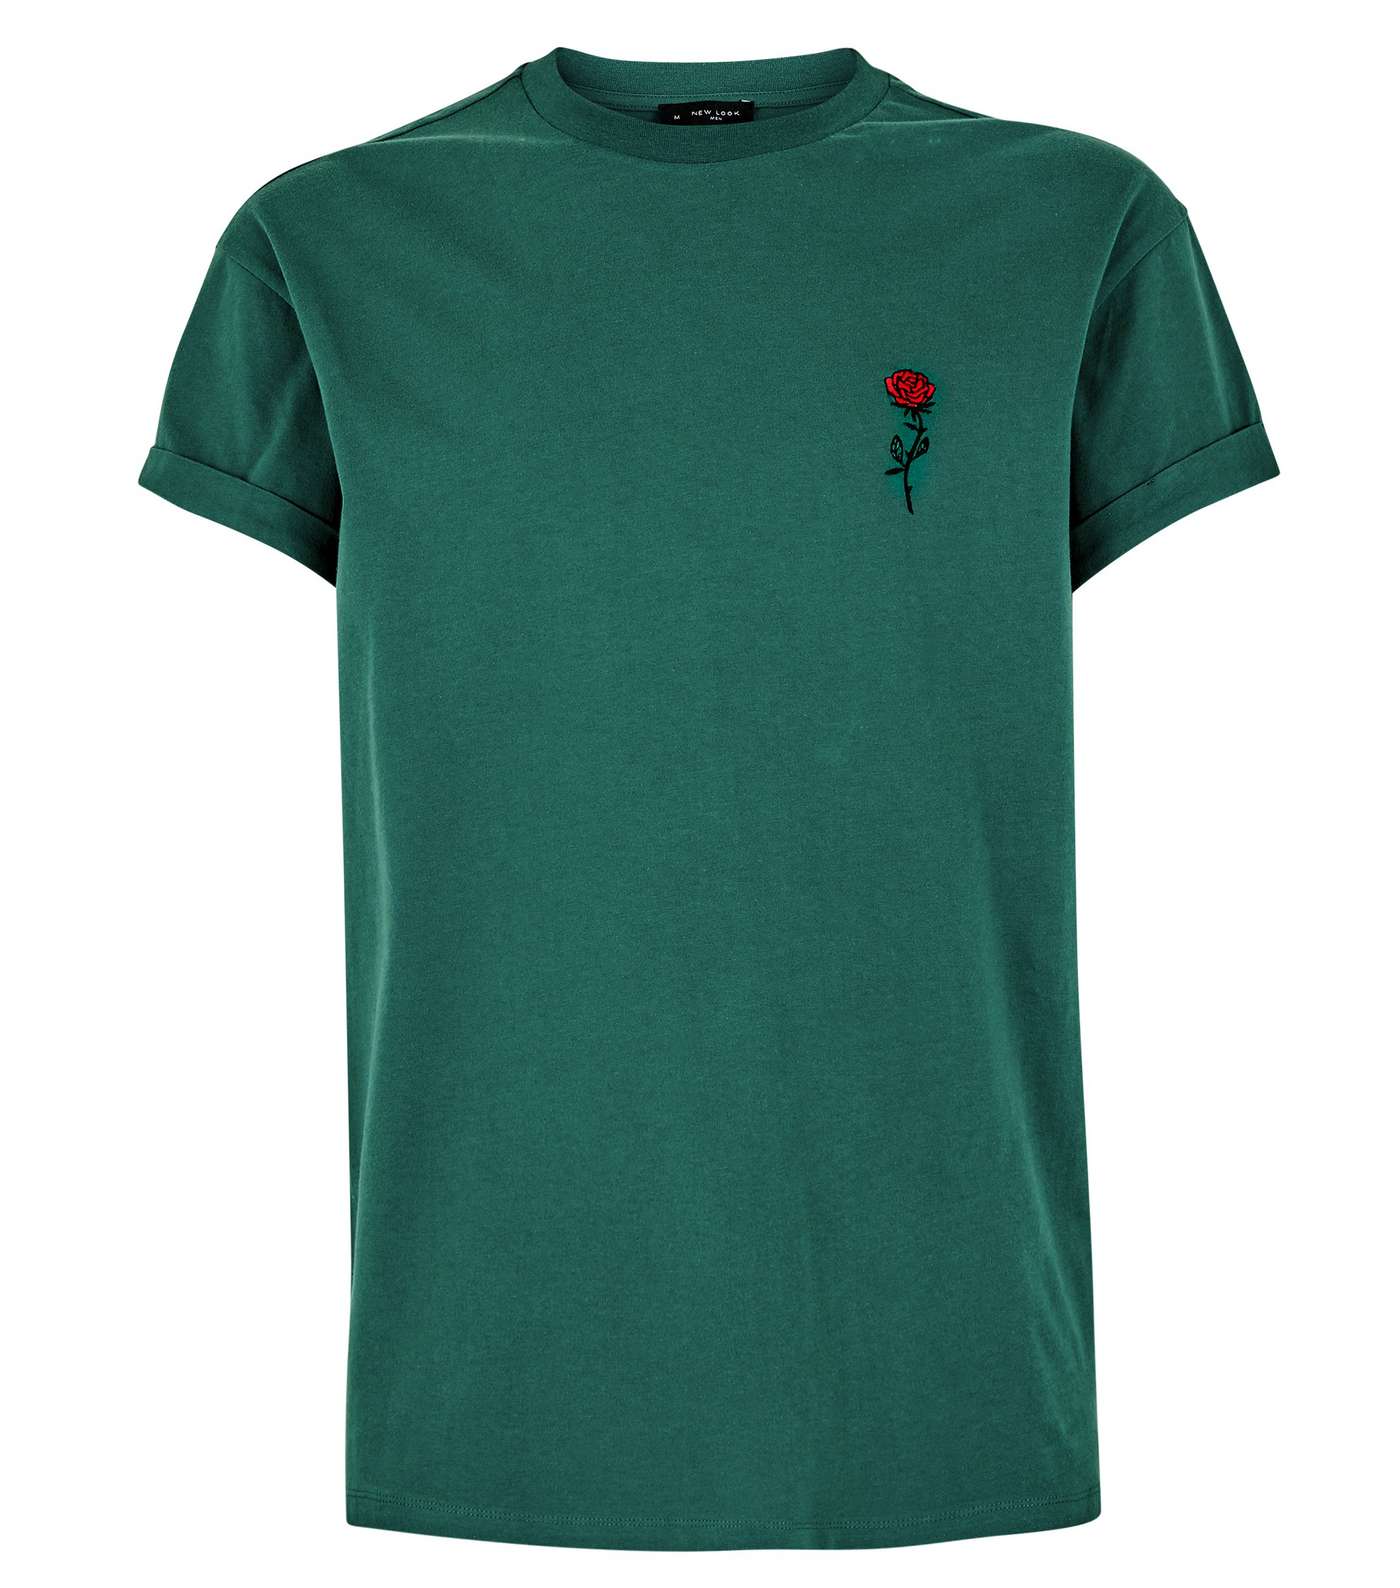 Green Embroidered Rose T-Shirt Image 4